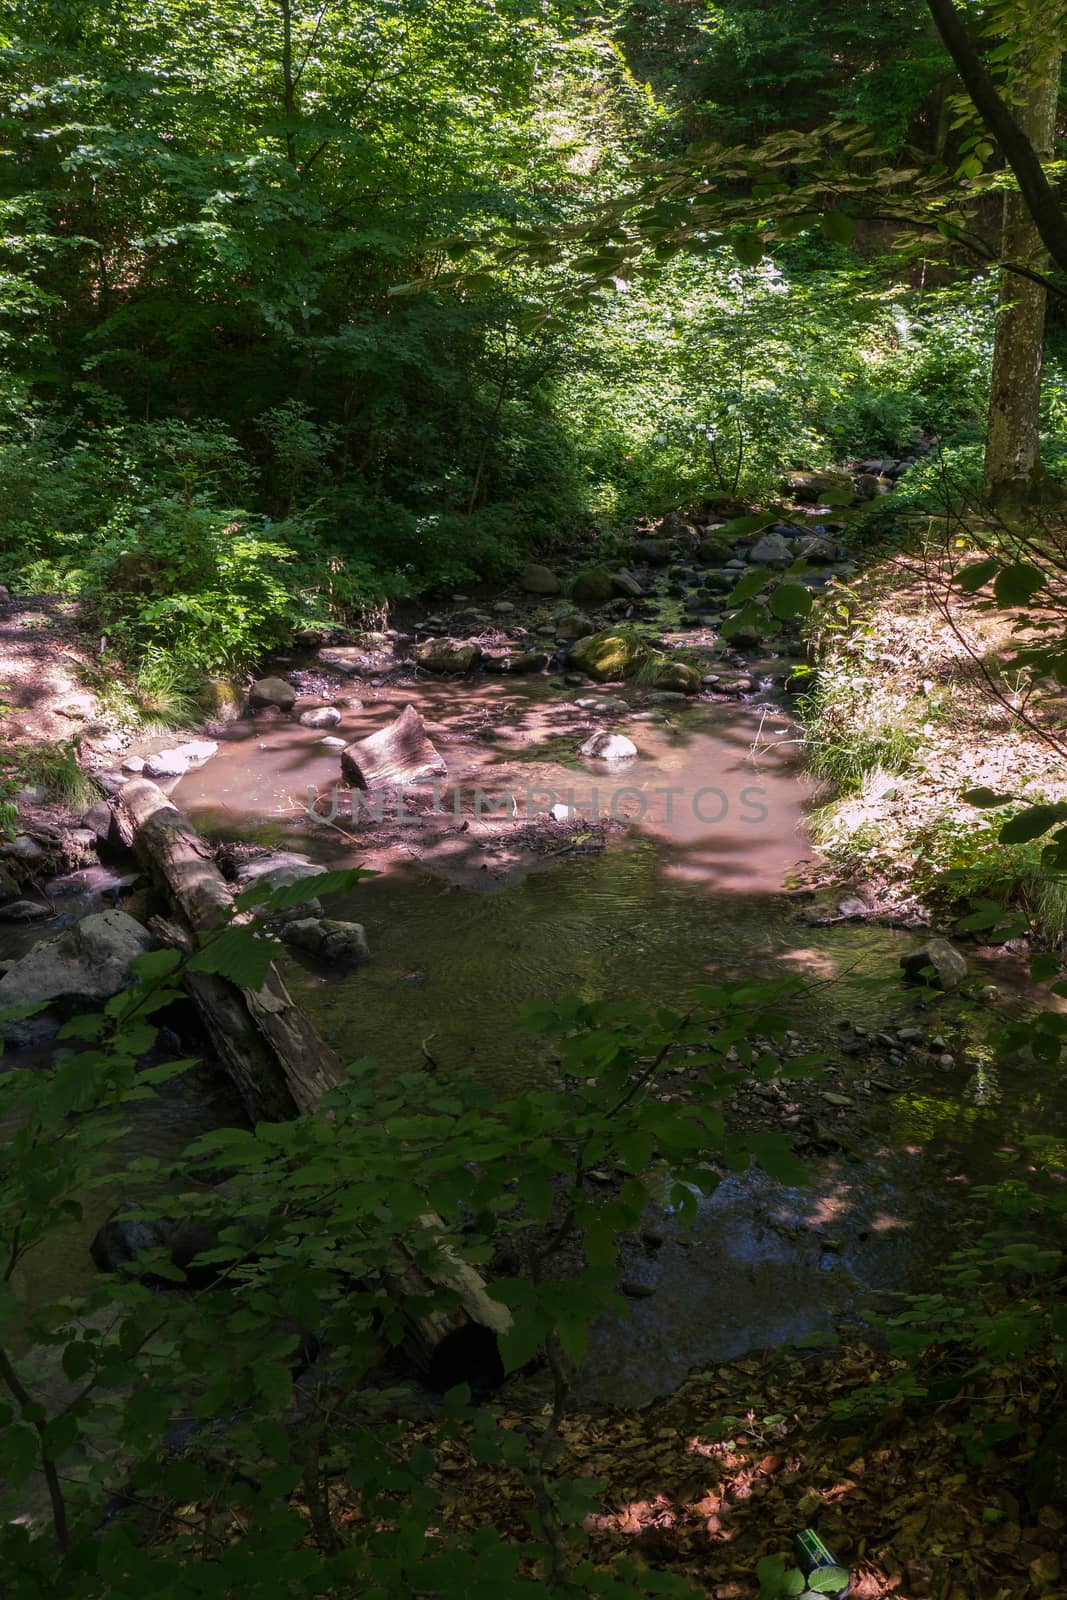 A dirty, shallow forest river with logs and debris in the shade of trees